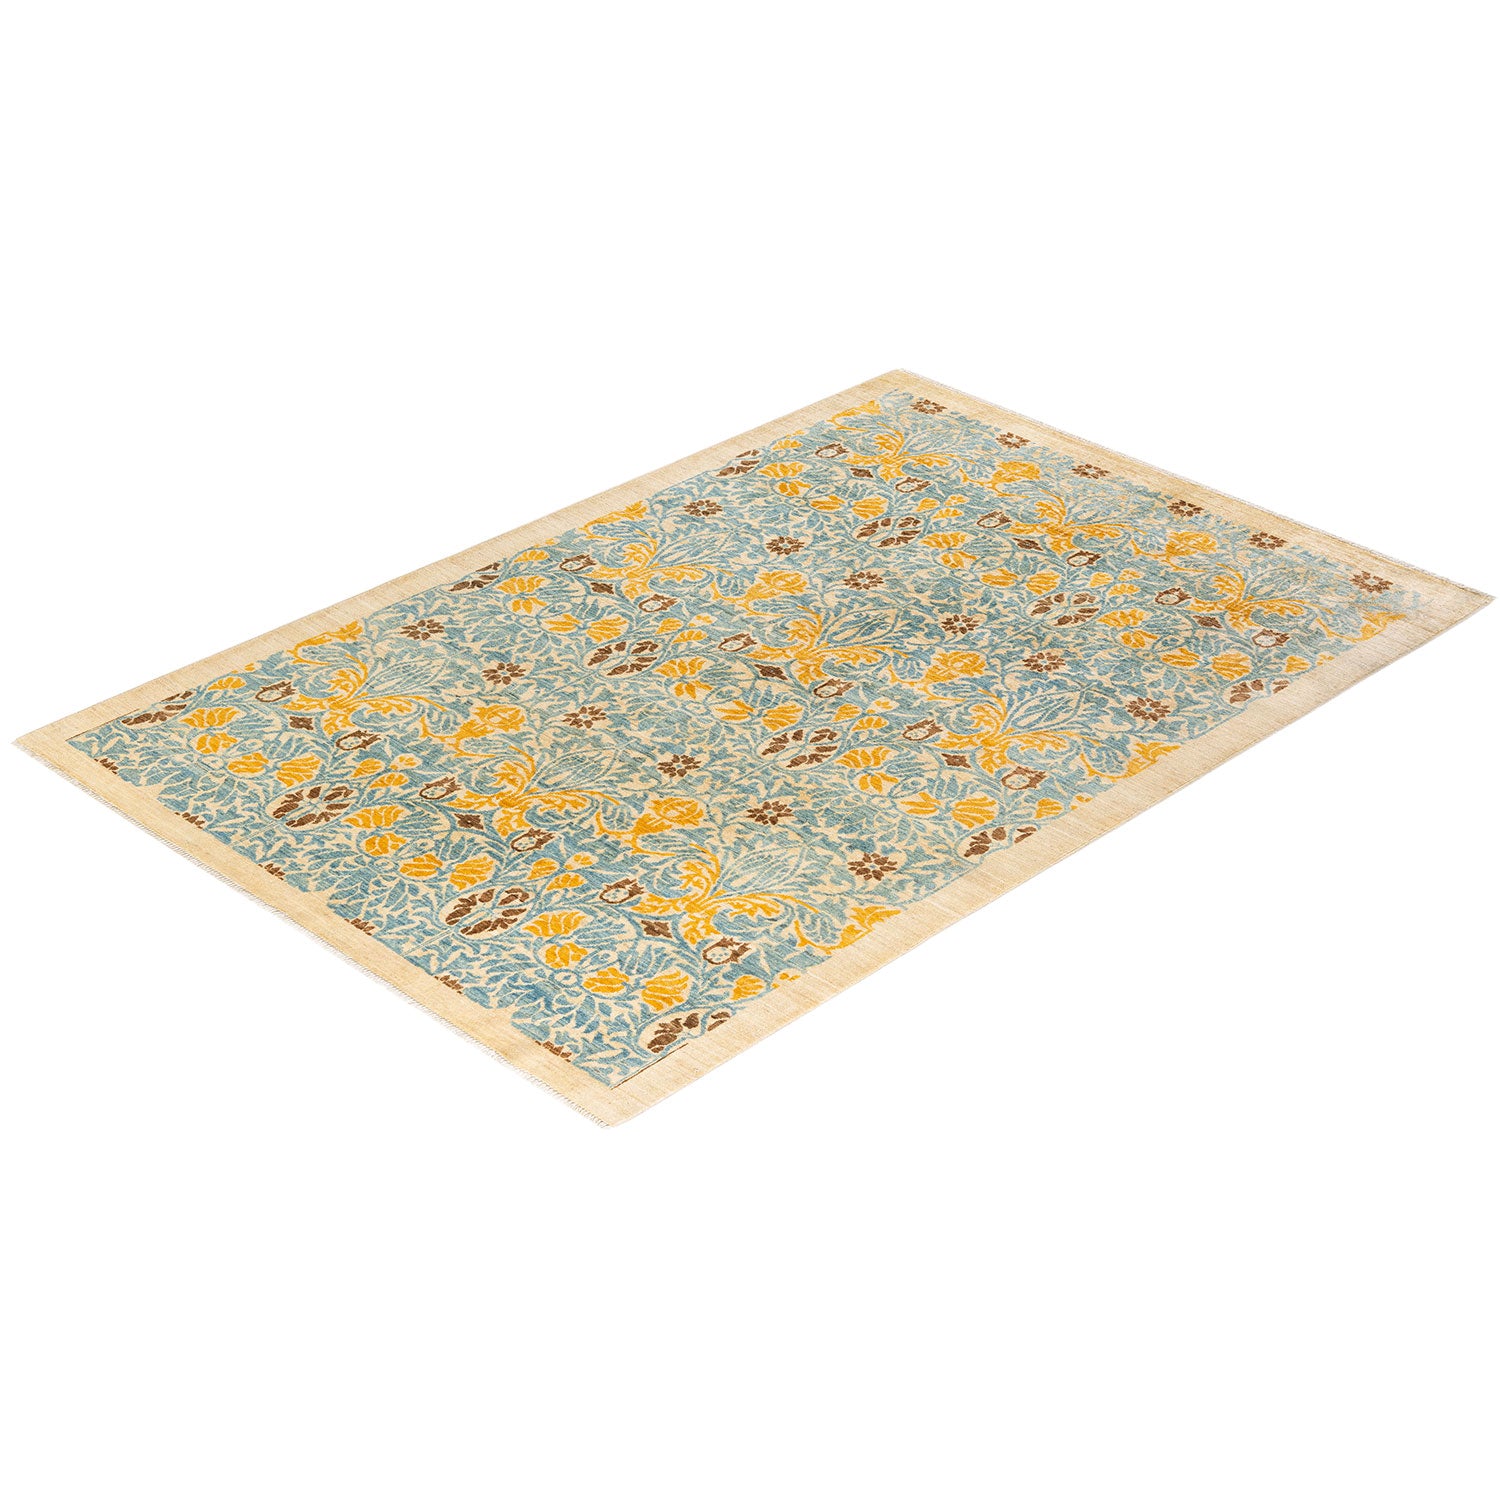 Vintage-inspired floral rug in yellow, gold, and brown hues